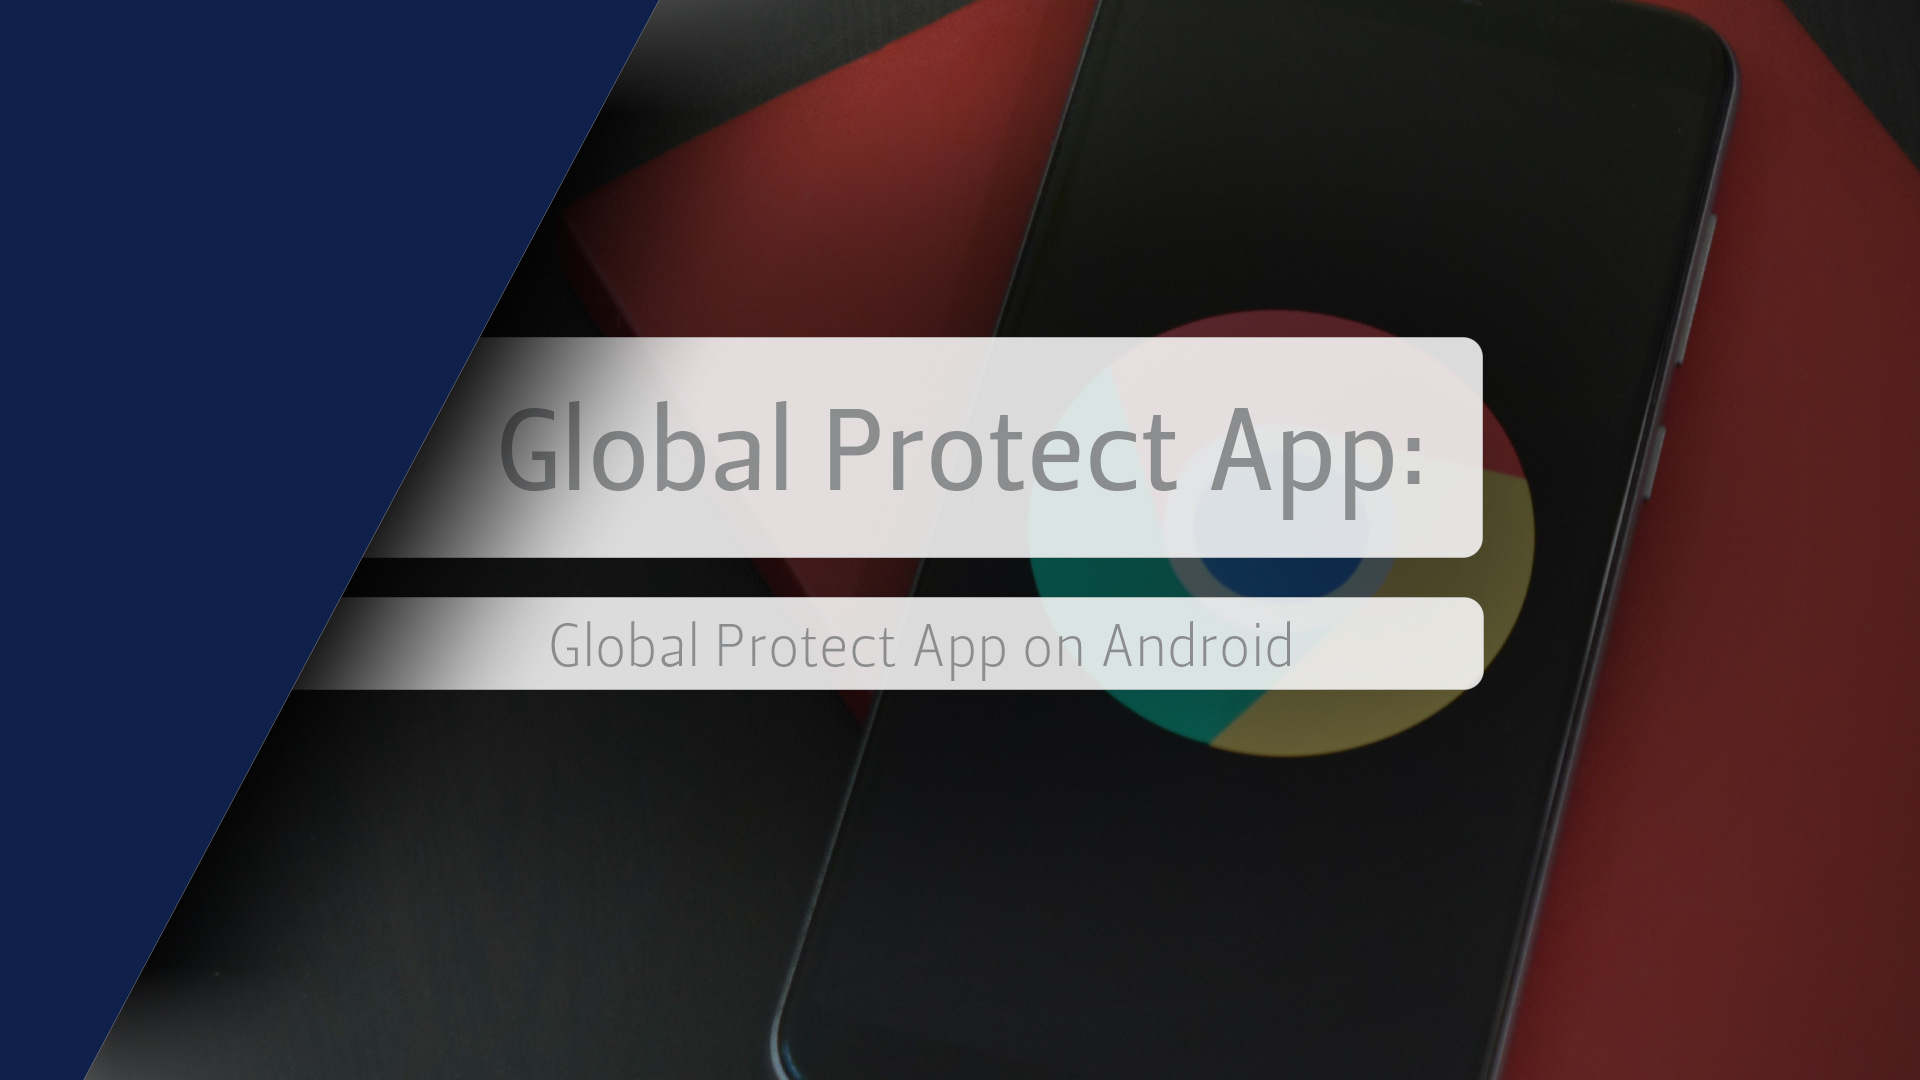 Global Protect App on Android